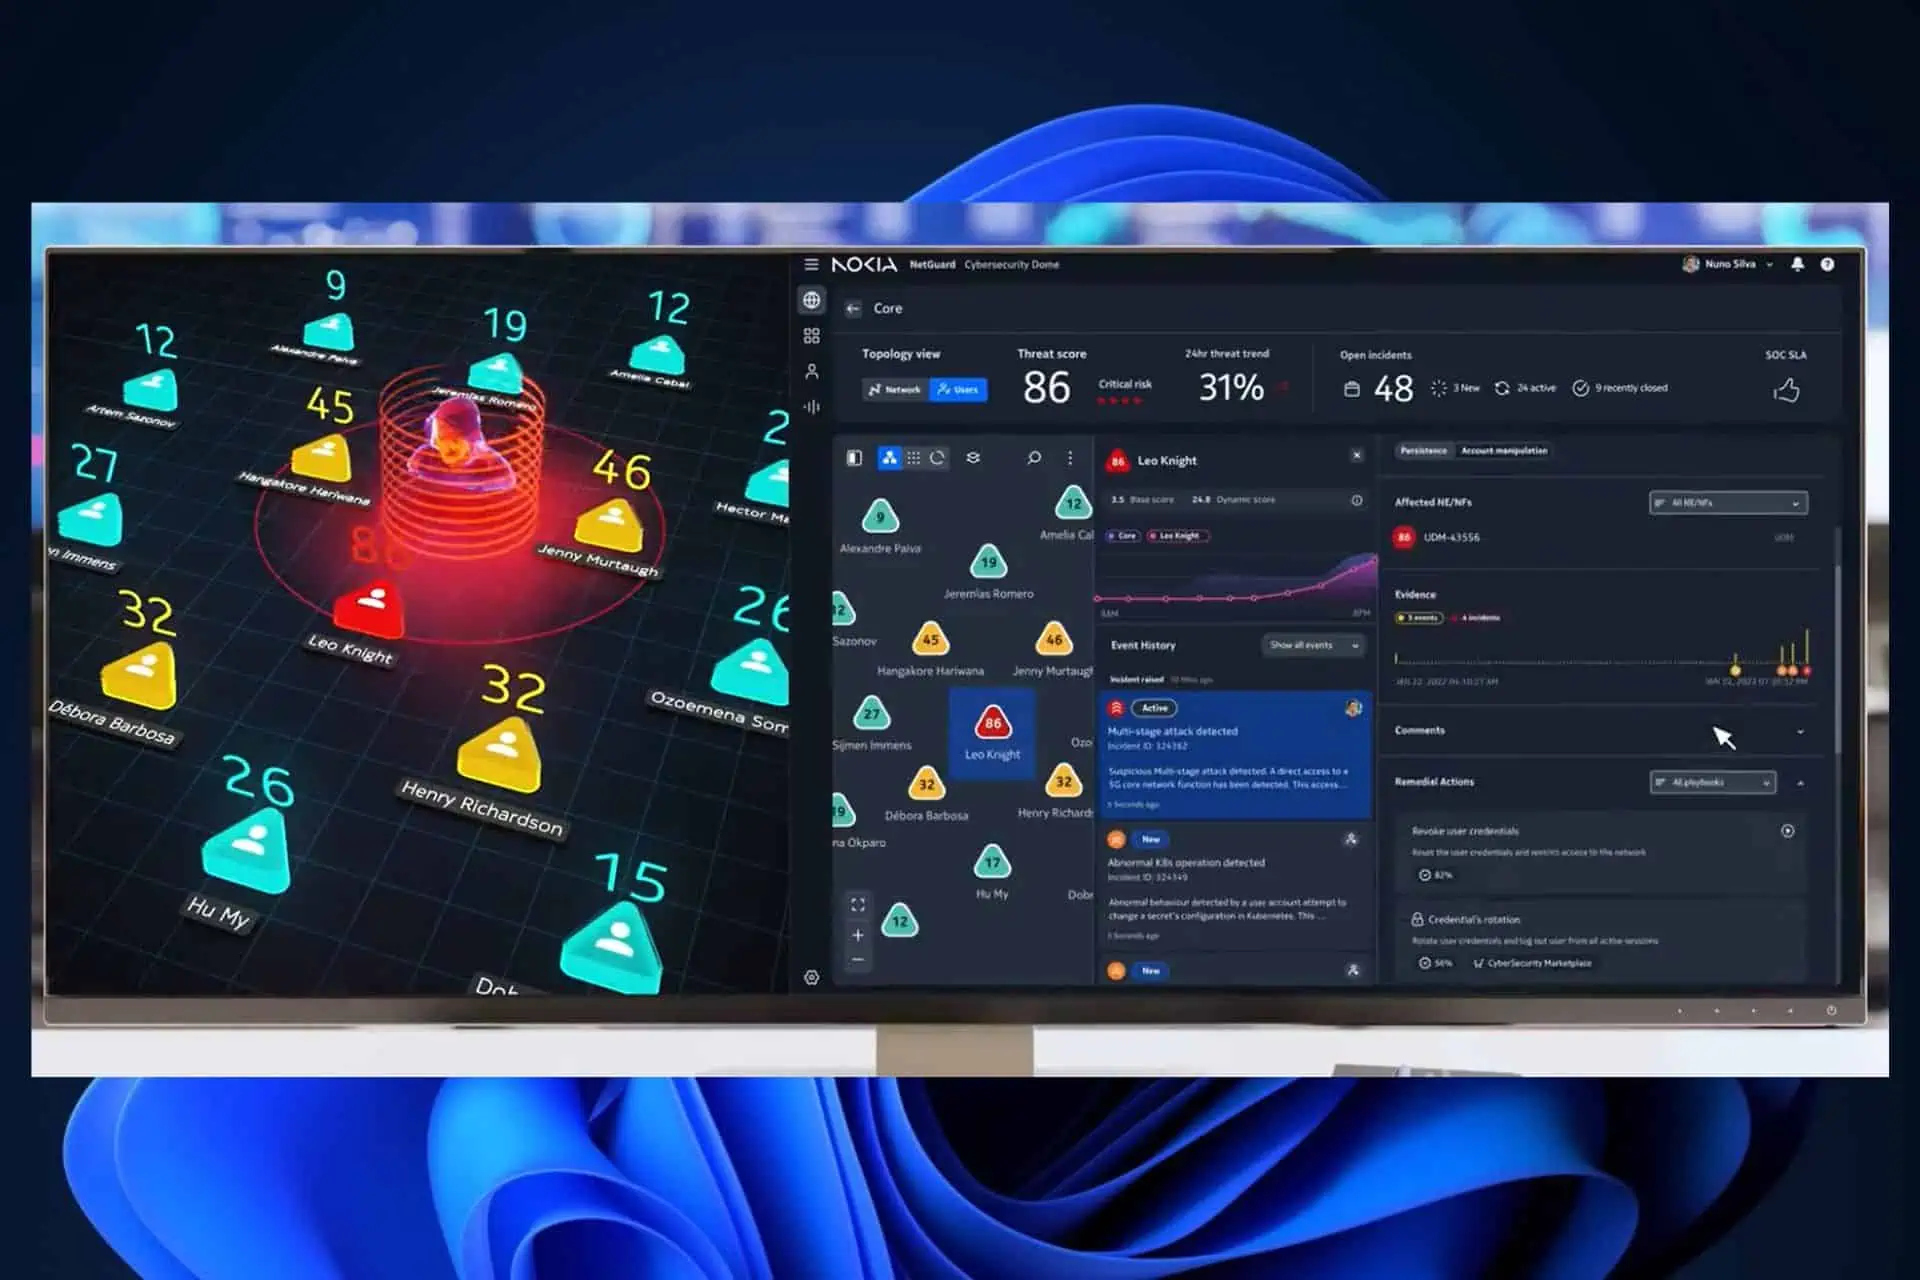 NetGuard Cybersecurity Dome Demo was released; Nokia x Microsoft partnership is using AI to provide a quick threat detection